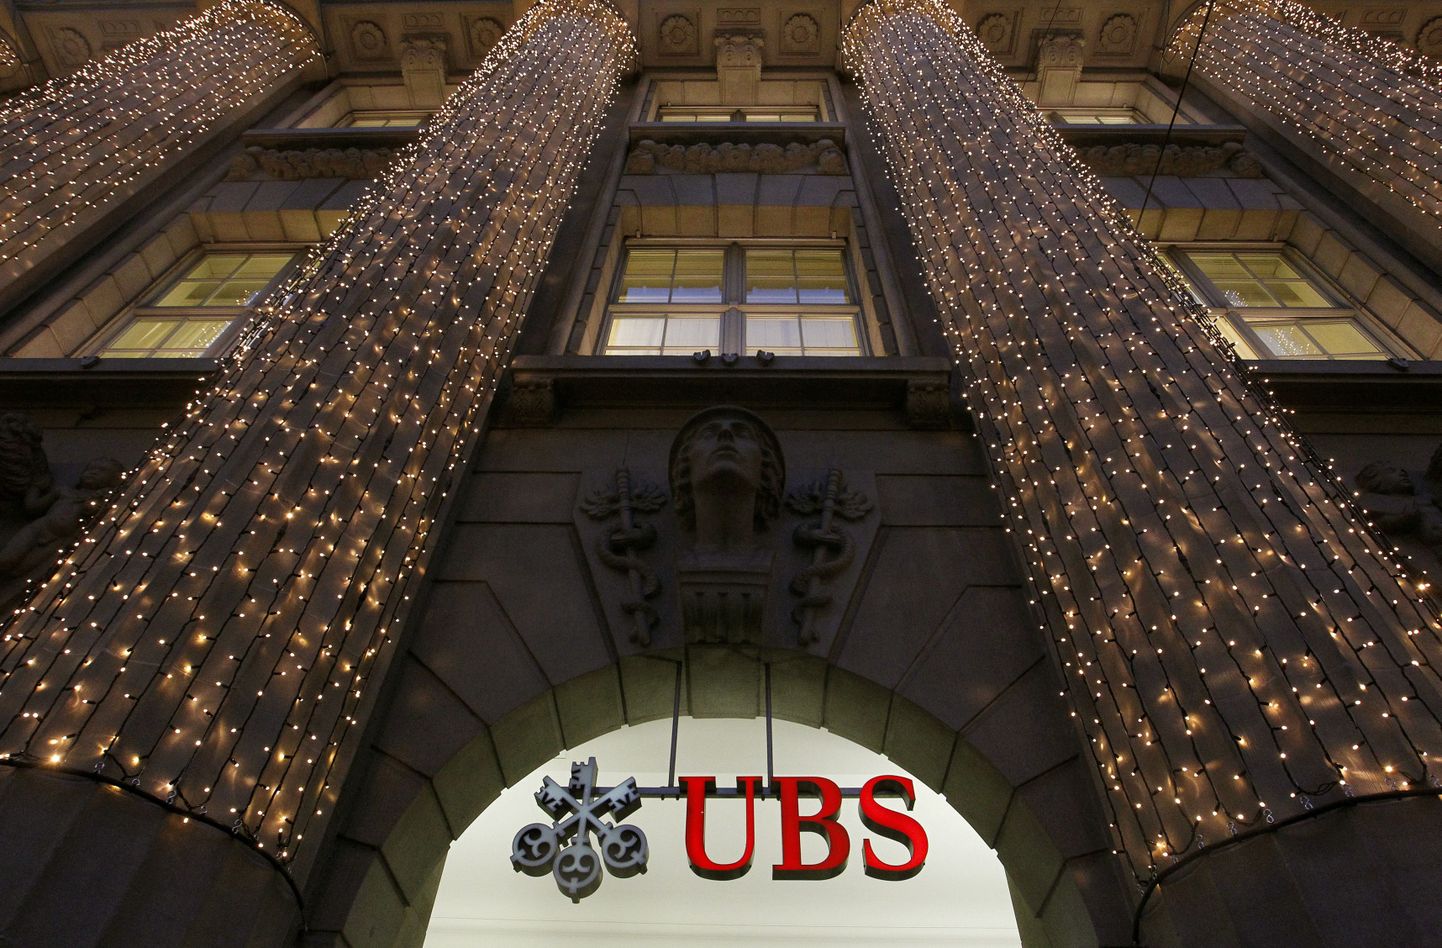 Christmas lights are illuminated at an office building of Swiss bank UBS in Zurich in this file photo taken December 4, 2012.  UBS faces a combined fine of around $1 billion next week to settle charges of rigging the Libor interest rate benchmark, a person familiar with the situation said on Thursday.  REUTERS/Arnd Wiegmann/Files  (SWITZERLAND - Tags: BUSINESS CRIME LAW)